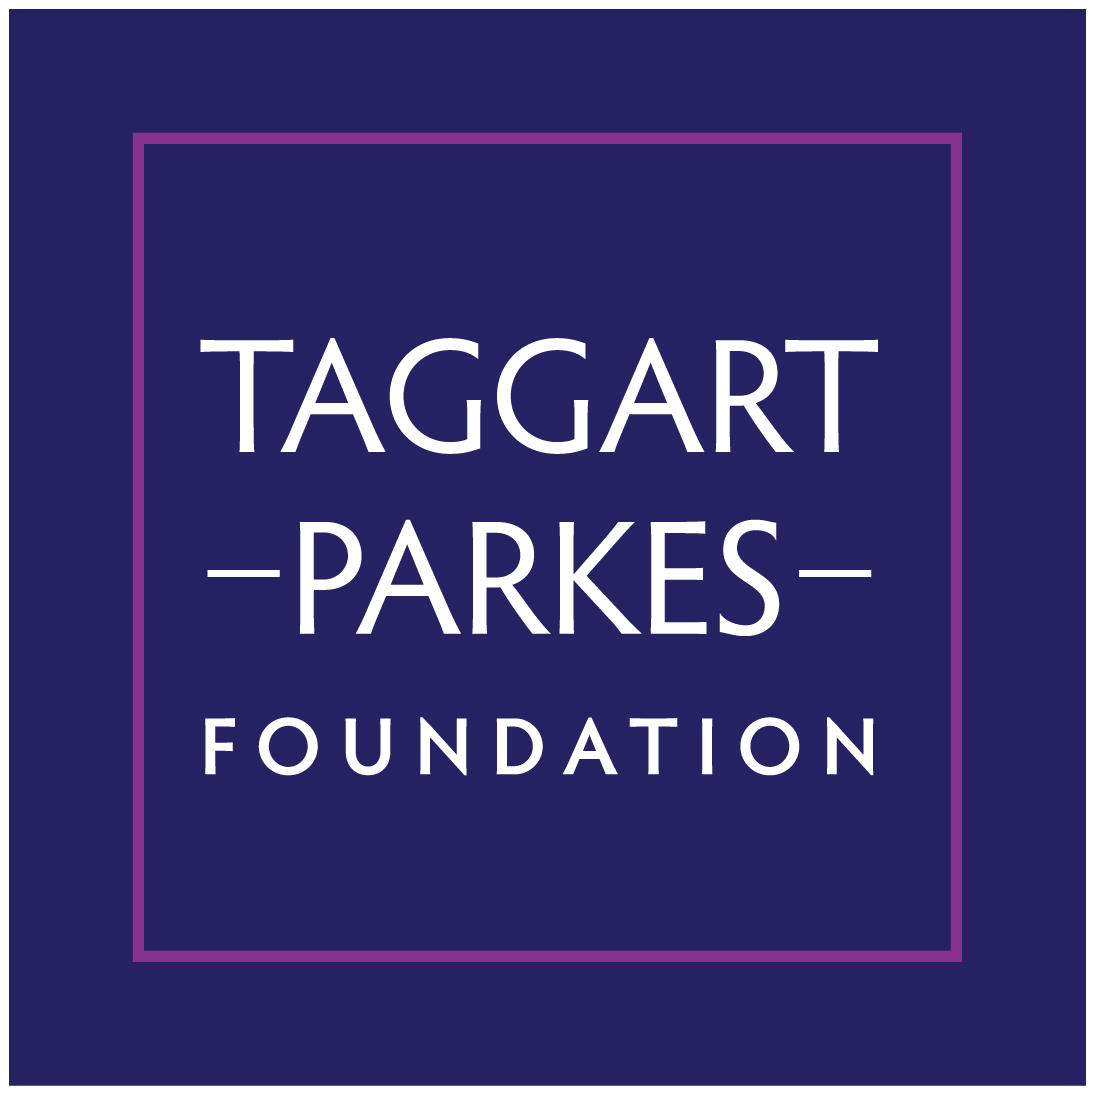 Taggart Parkes